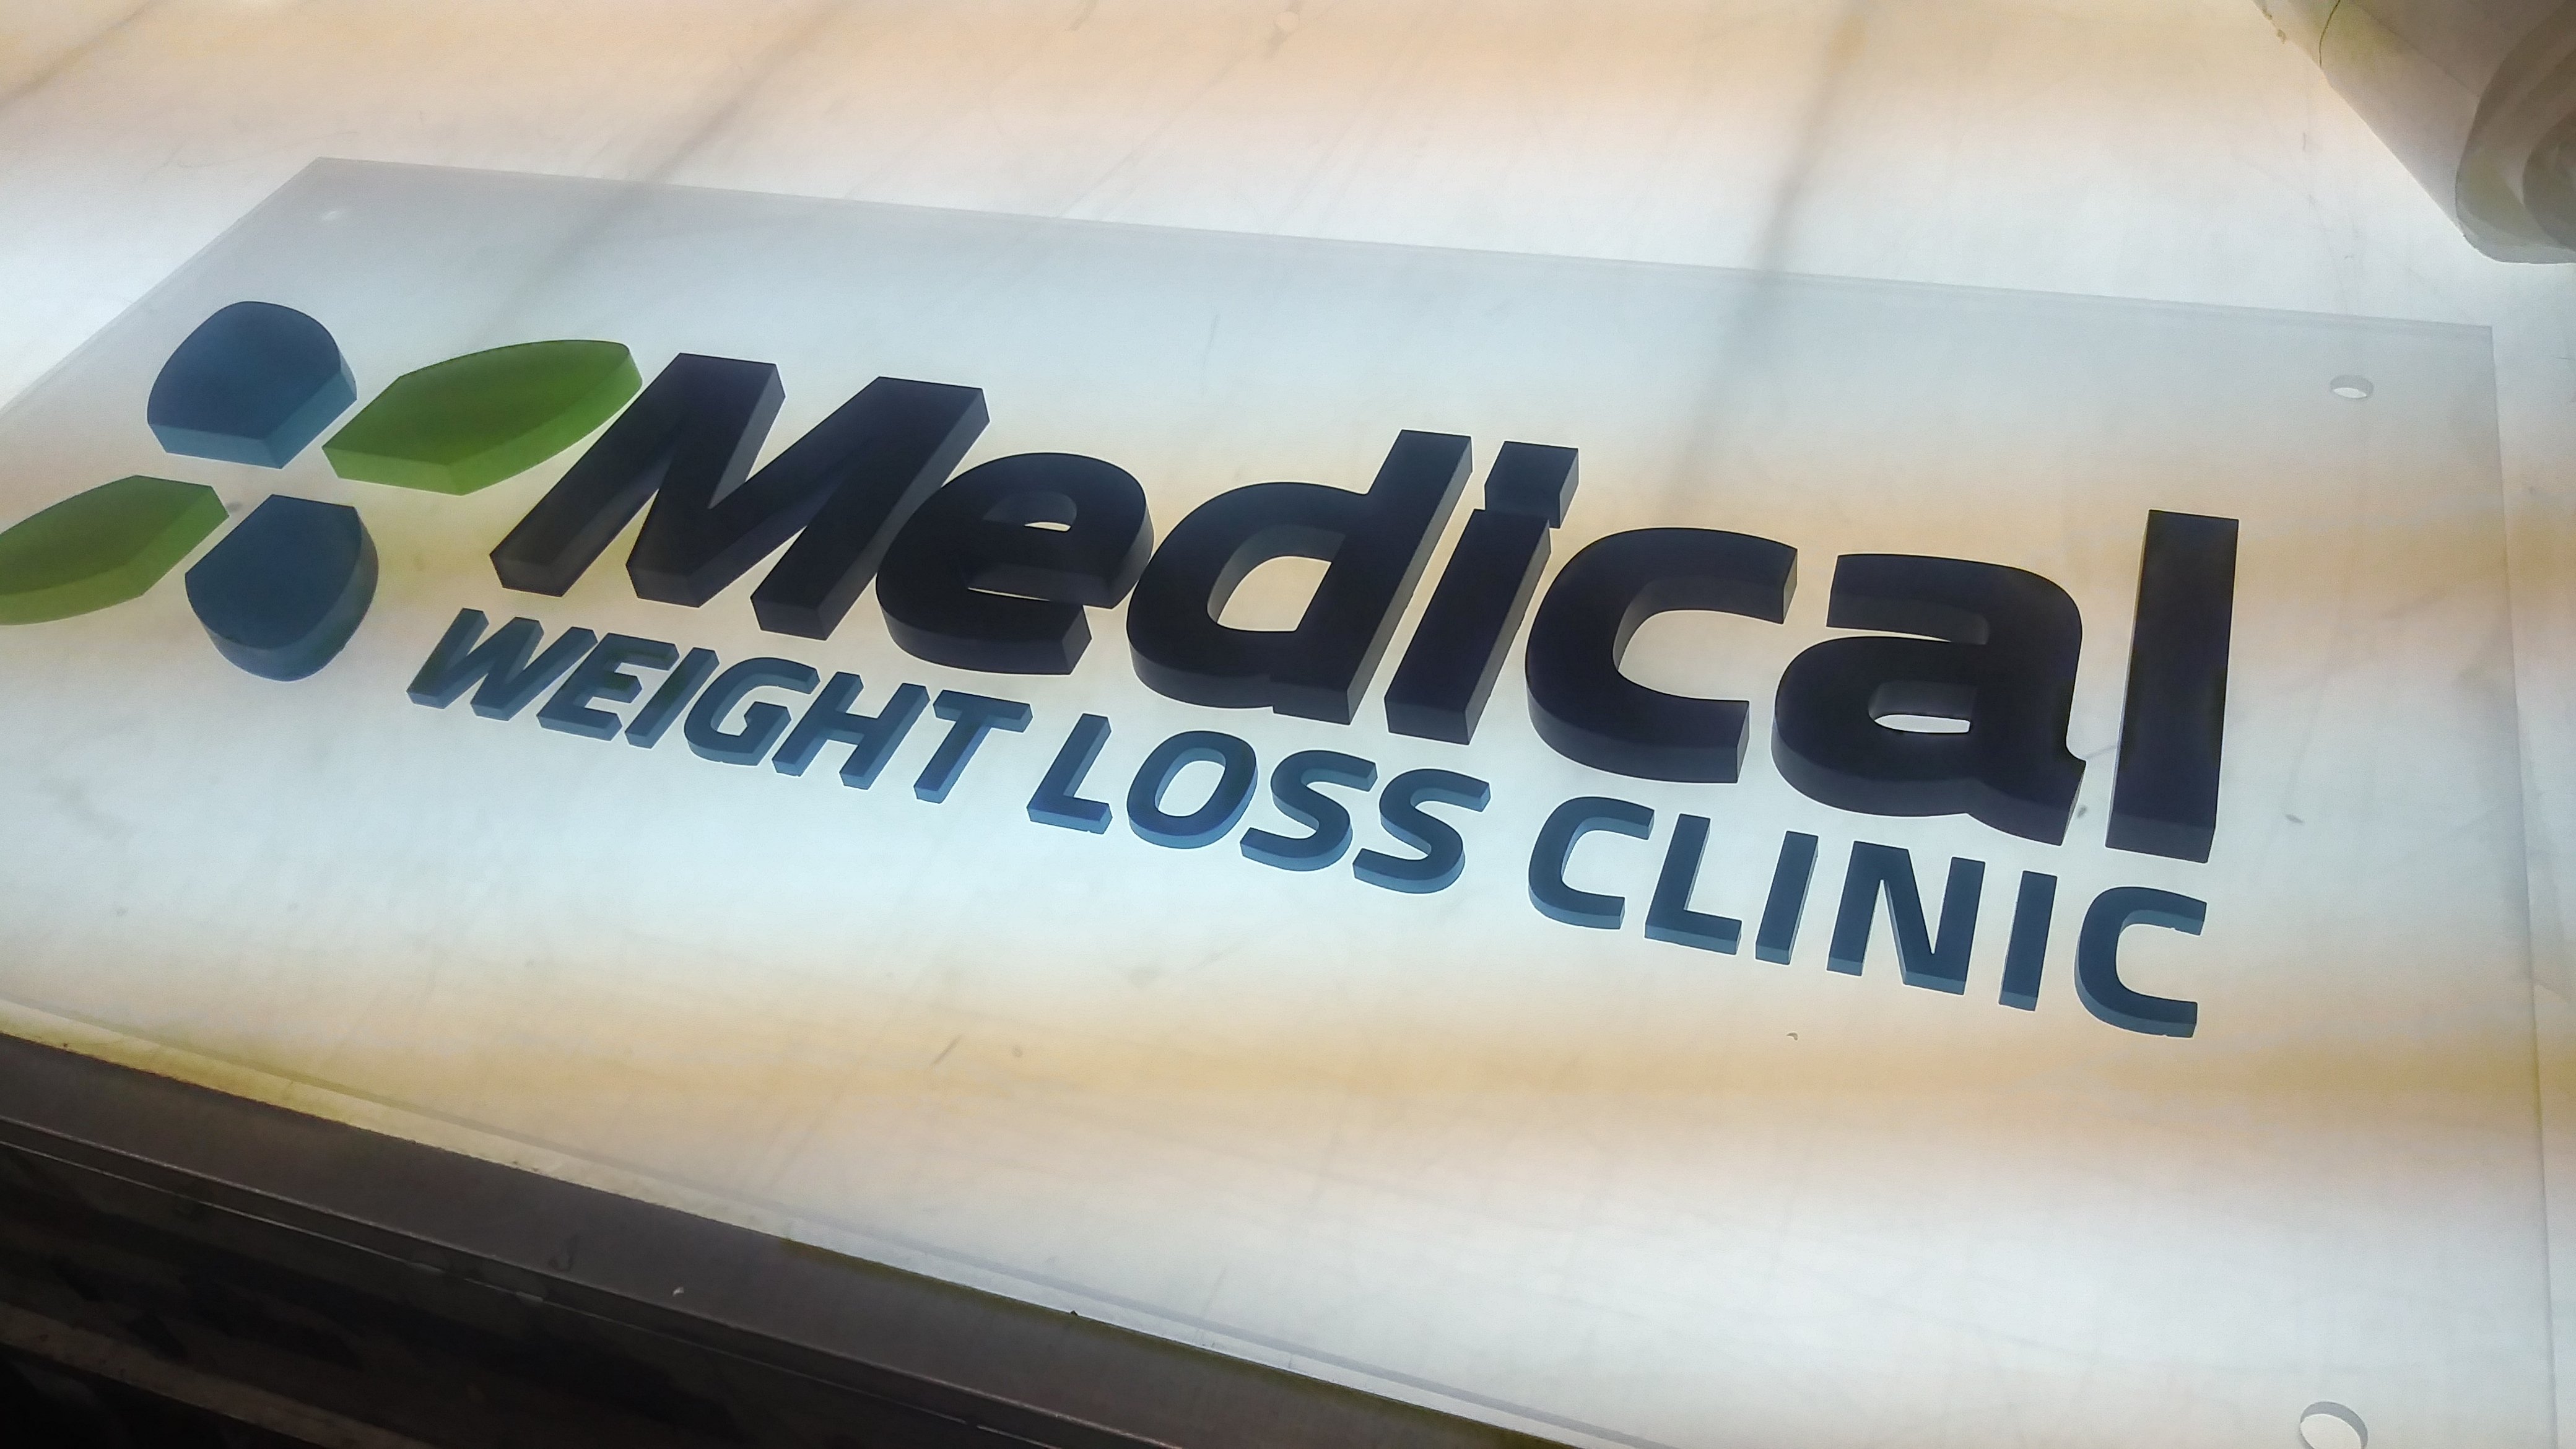 Medical Weight Loss Clinic Dimensional Sign